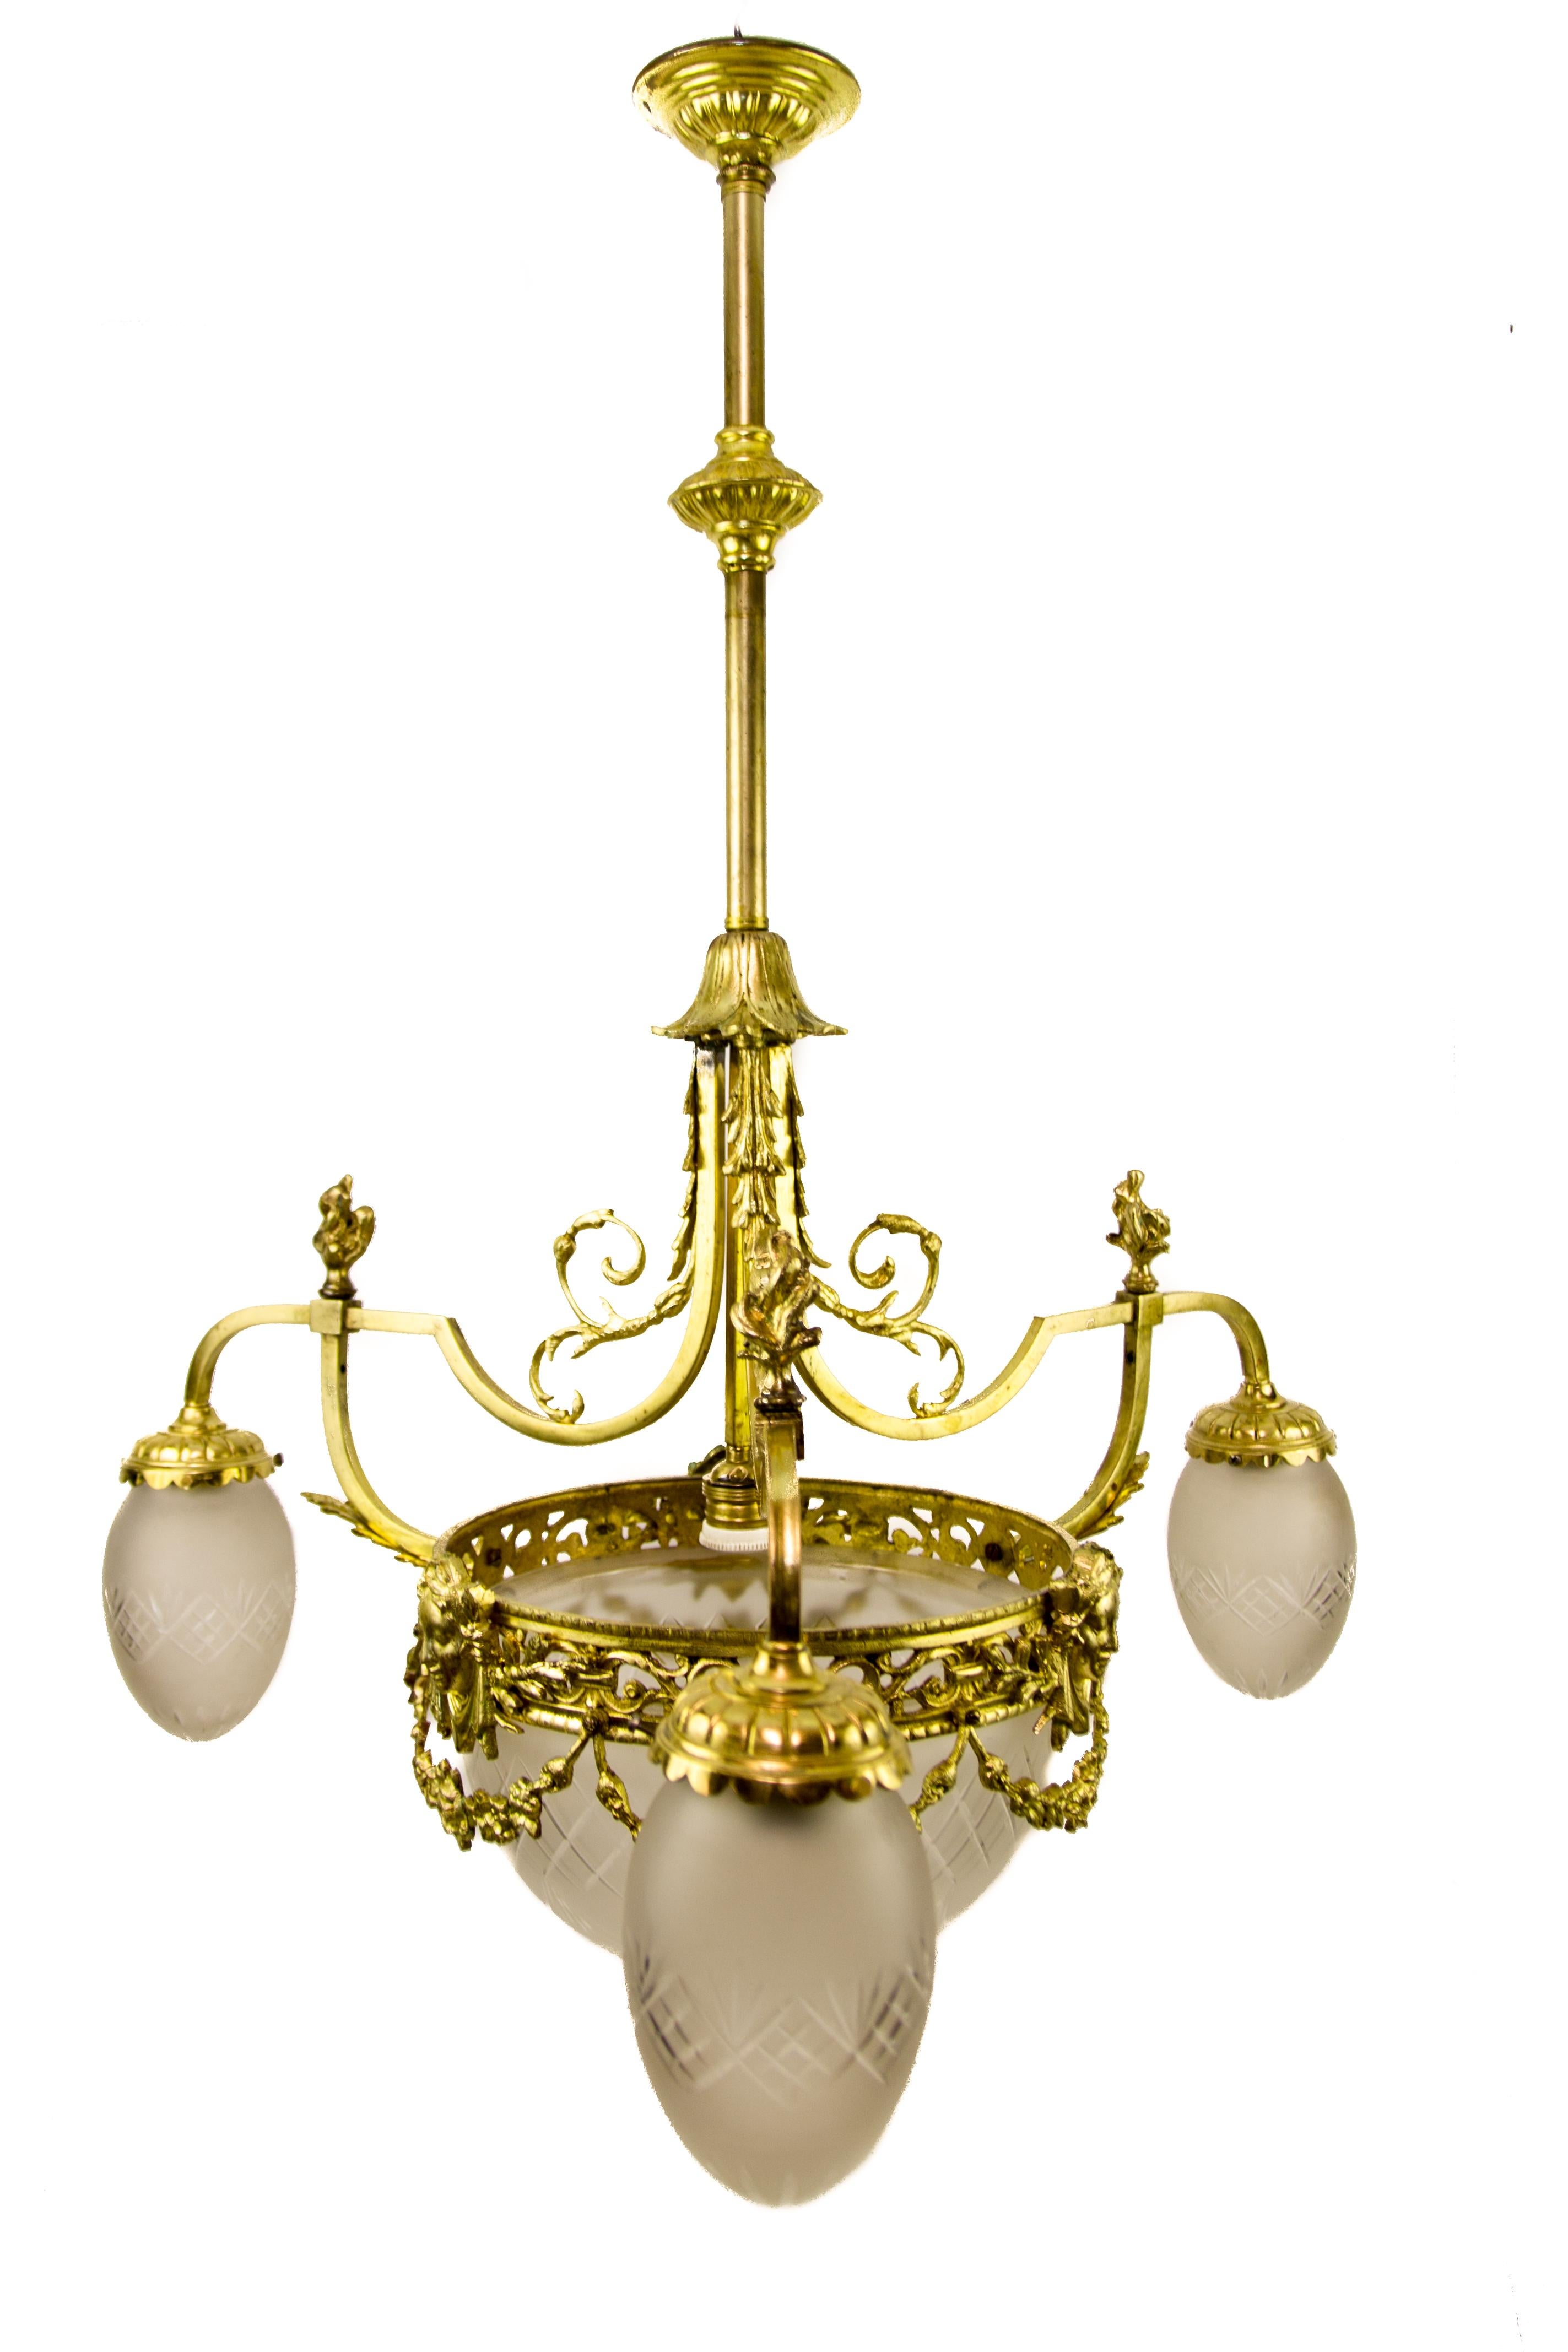 Louis XIV-style gilt bronze chandelier from the 1920s with frosted glass lampshades, ornately decorated with acanthus leaves, flower clusters, and caryatid faces. The antique chandelier has four lights, each with an E27 (E26) size light bulb